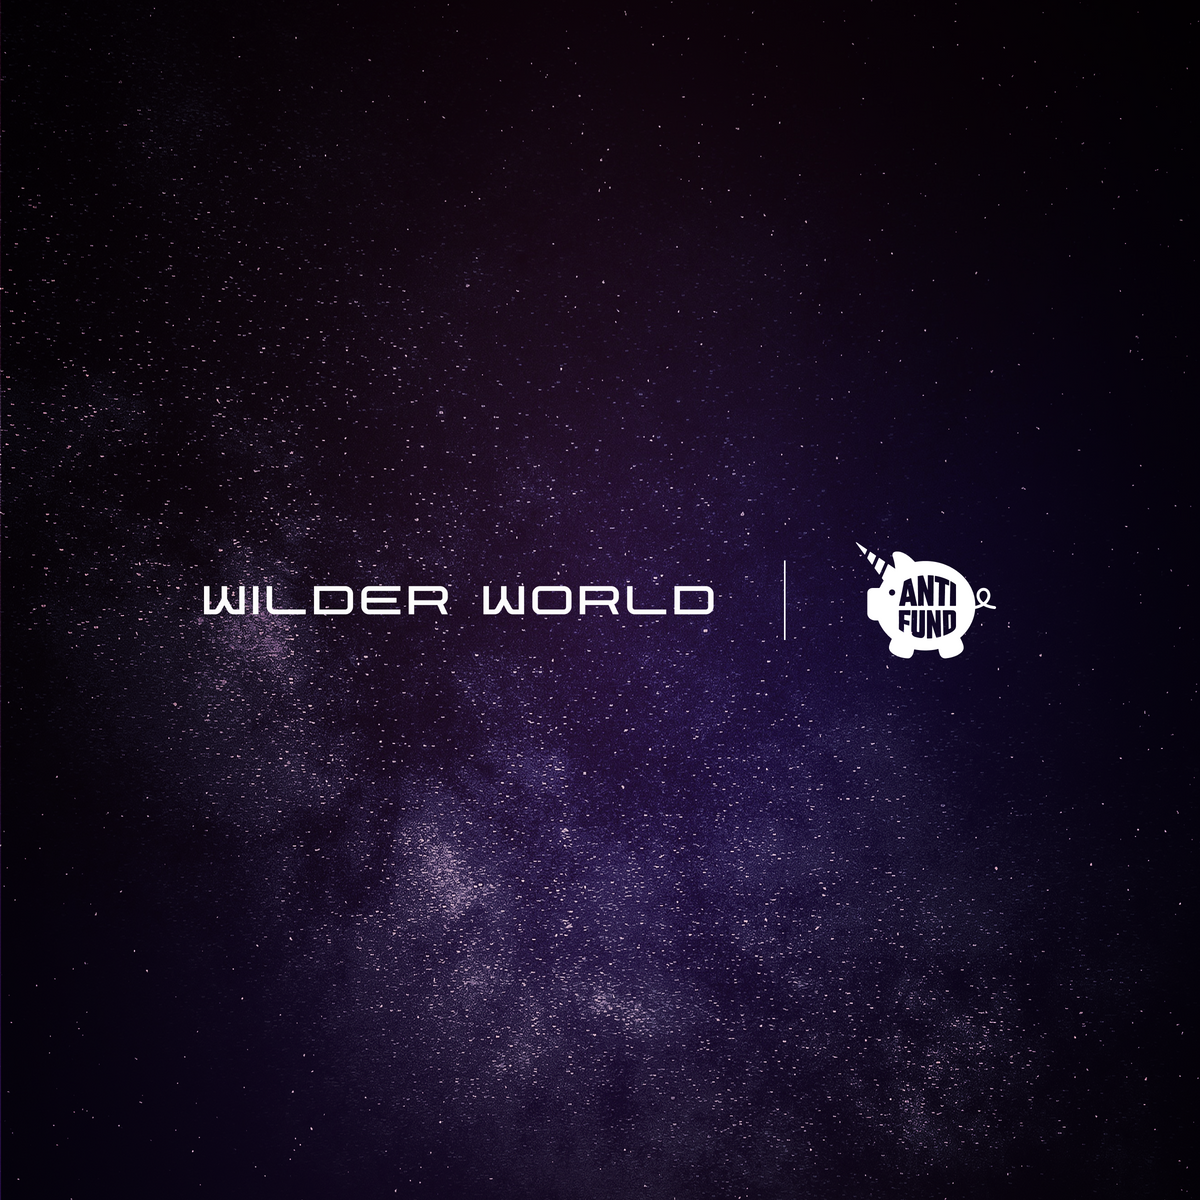 Jake Paul and Geoffrey Woo’s Anti Fund Pick Wilder World as The Metaverse of Choice